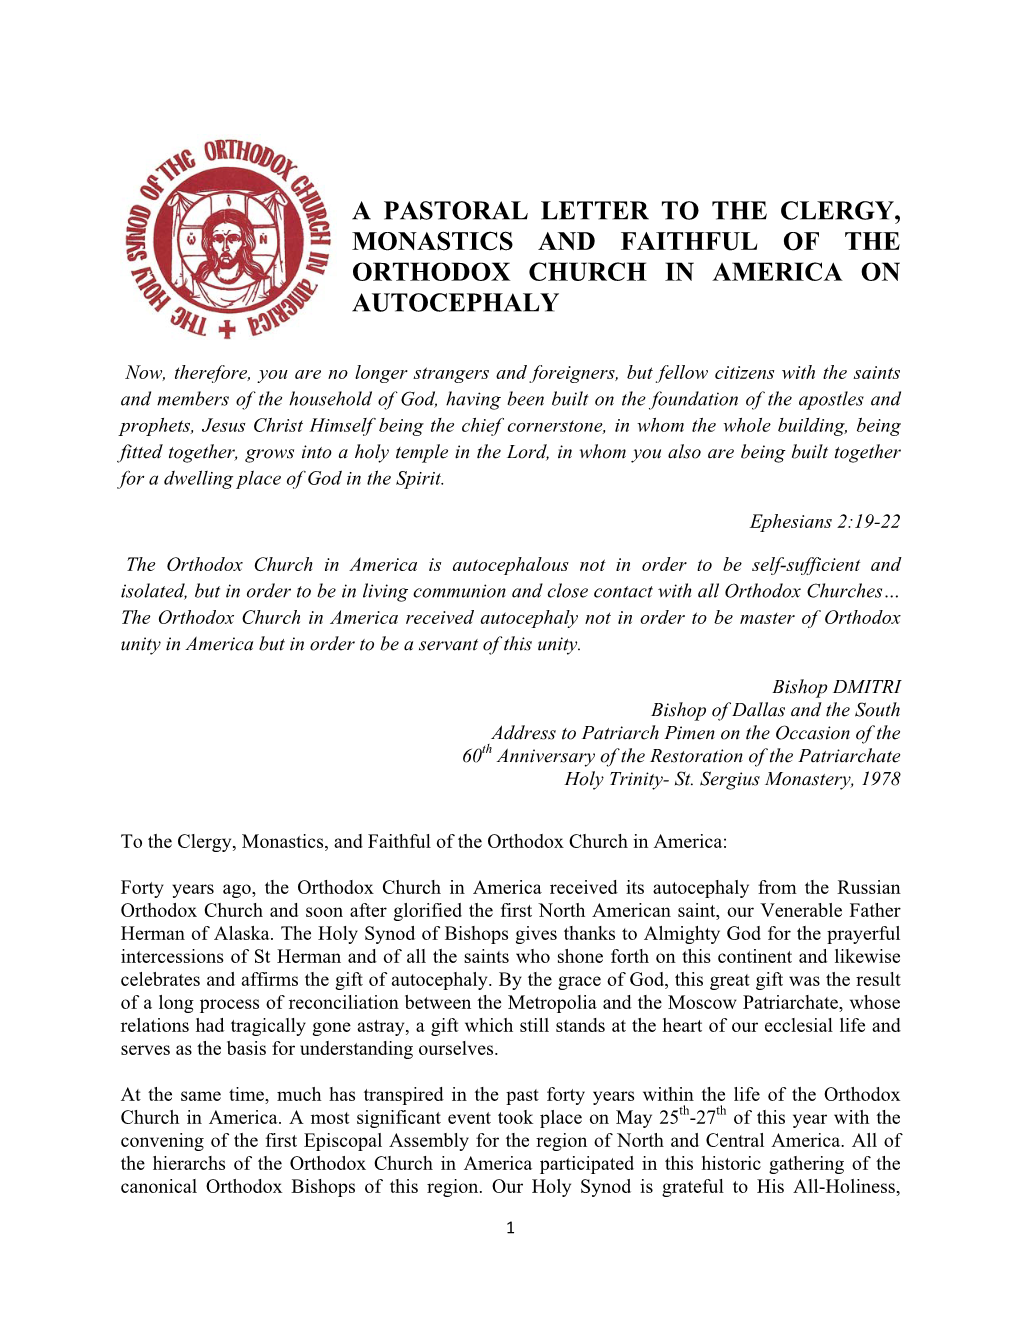 A Pastoral Letter to the Clergy, Monastics and Faithful of the Orthodox Church in America on Autocephaly